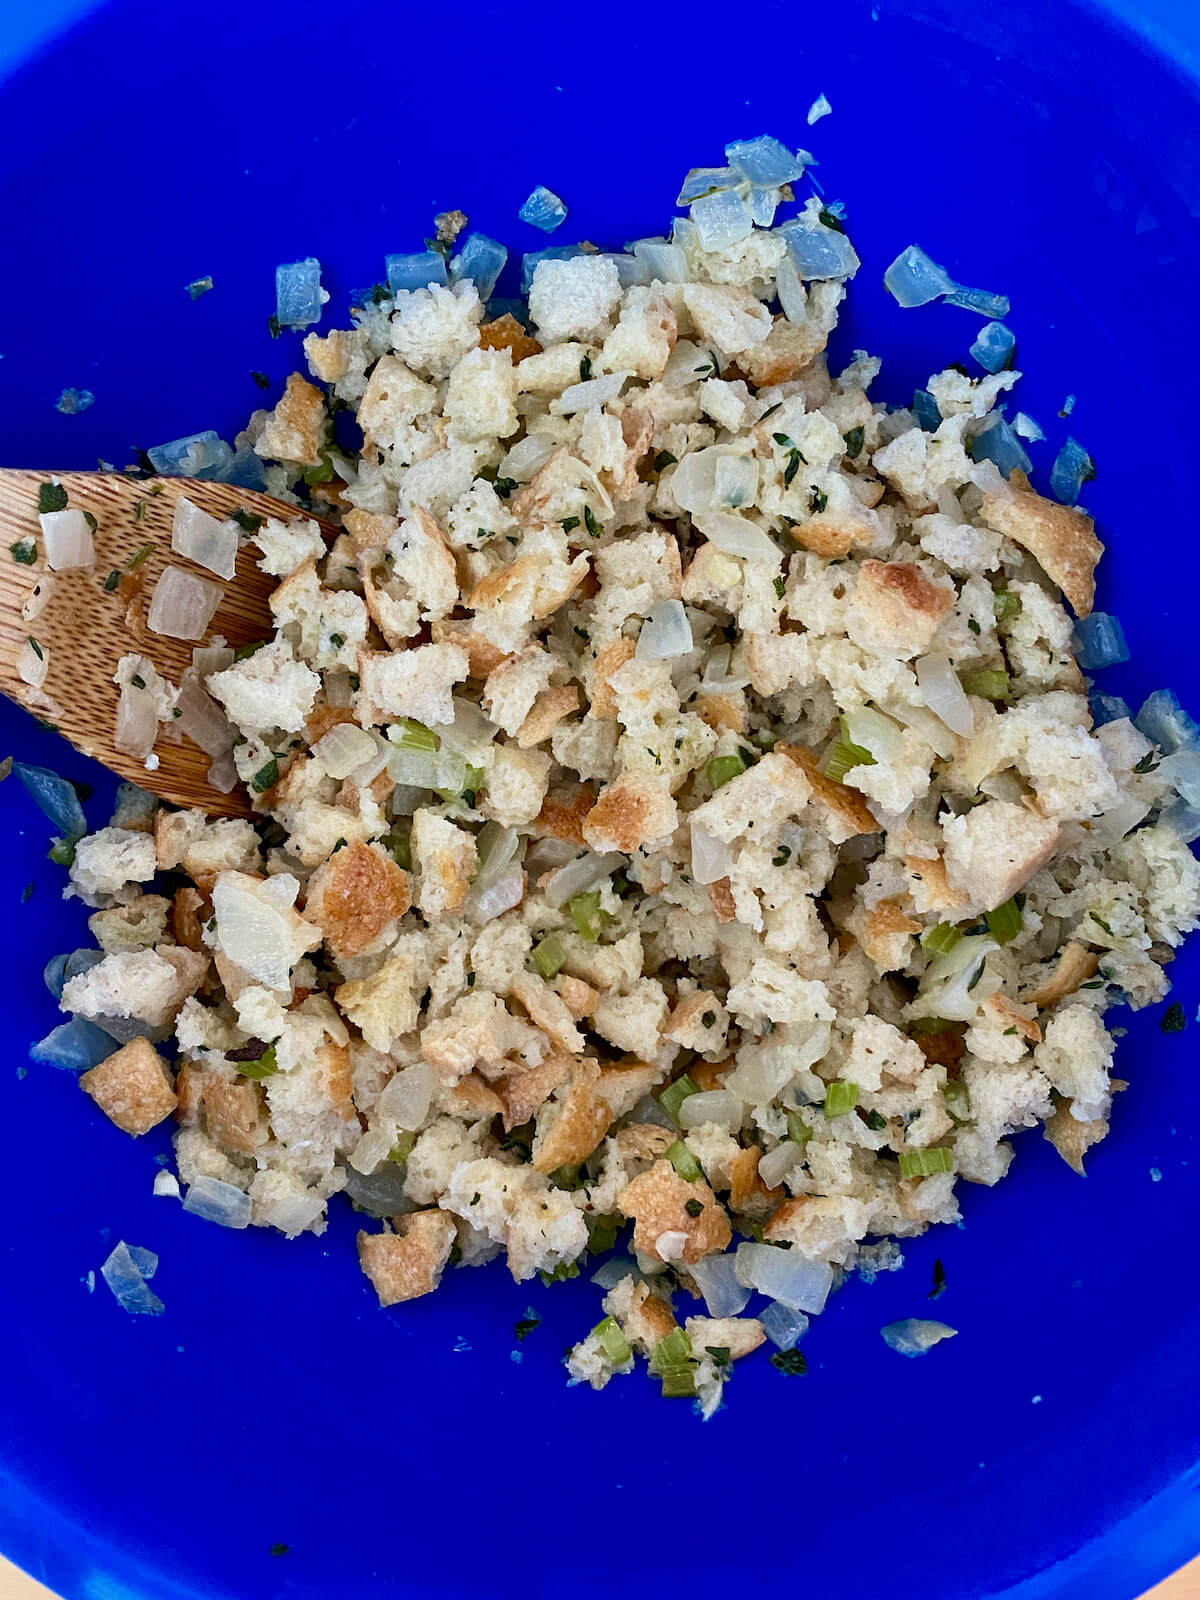 The finished stuffing mixture in a blue mixing bowl.